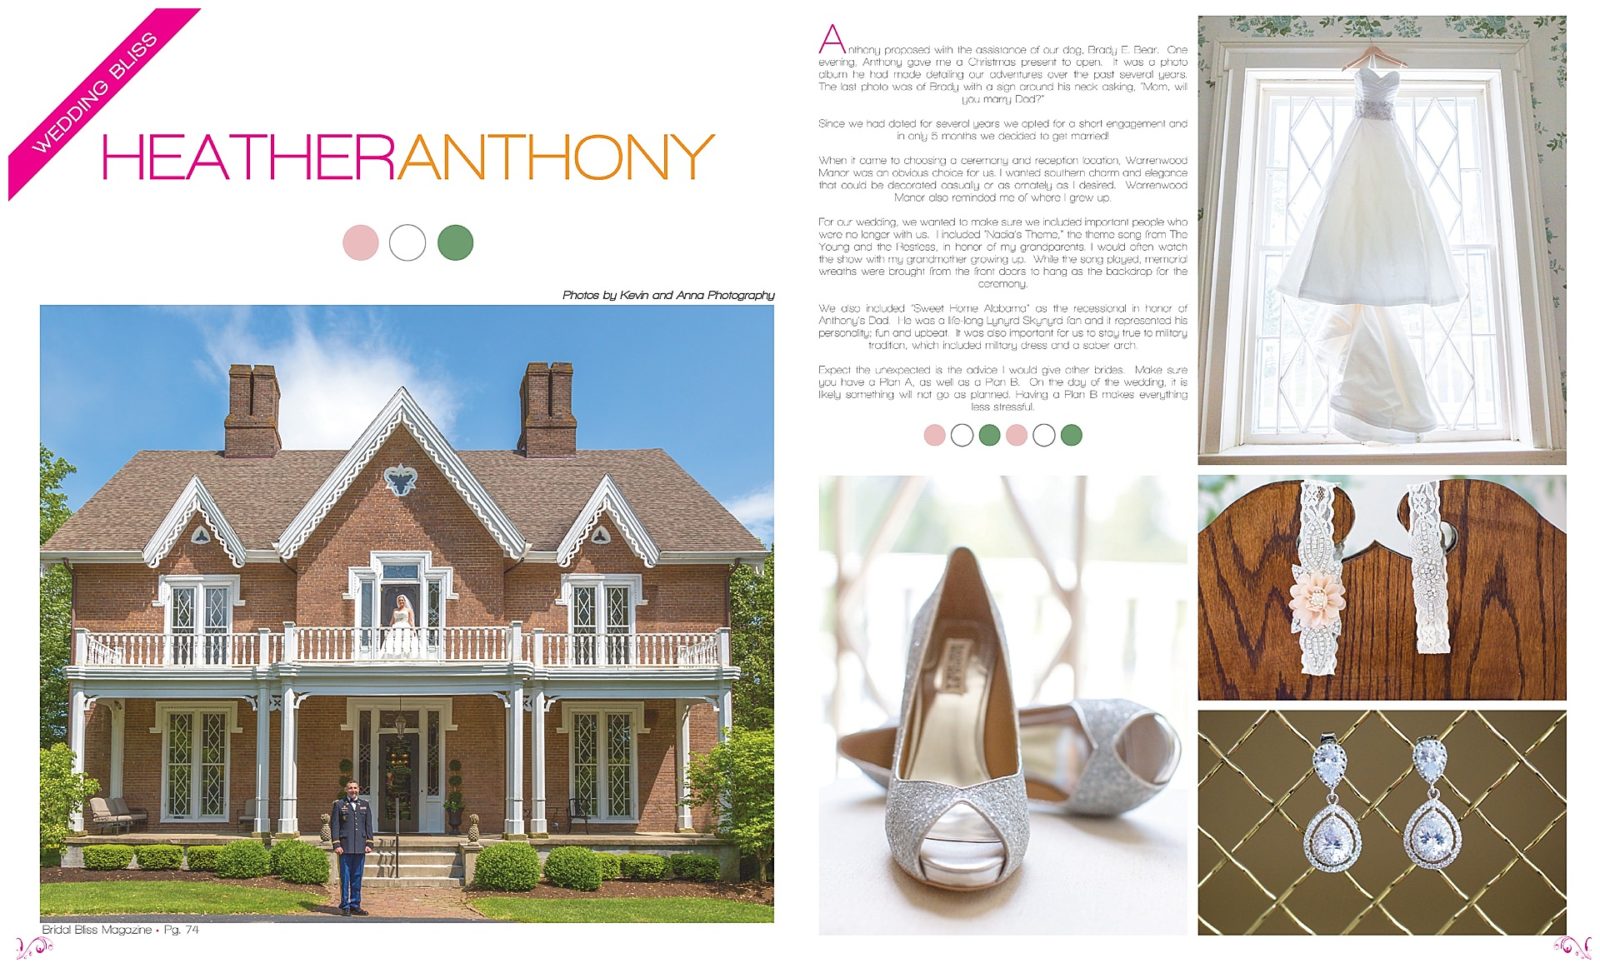 We were recently featured in Bridal Bliss Magazine a free resource for Central Kentucky brides featuring one of our weddings at Warrenwood Manor.